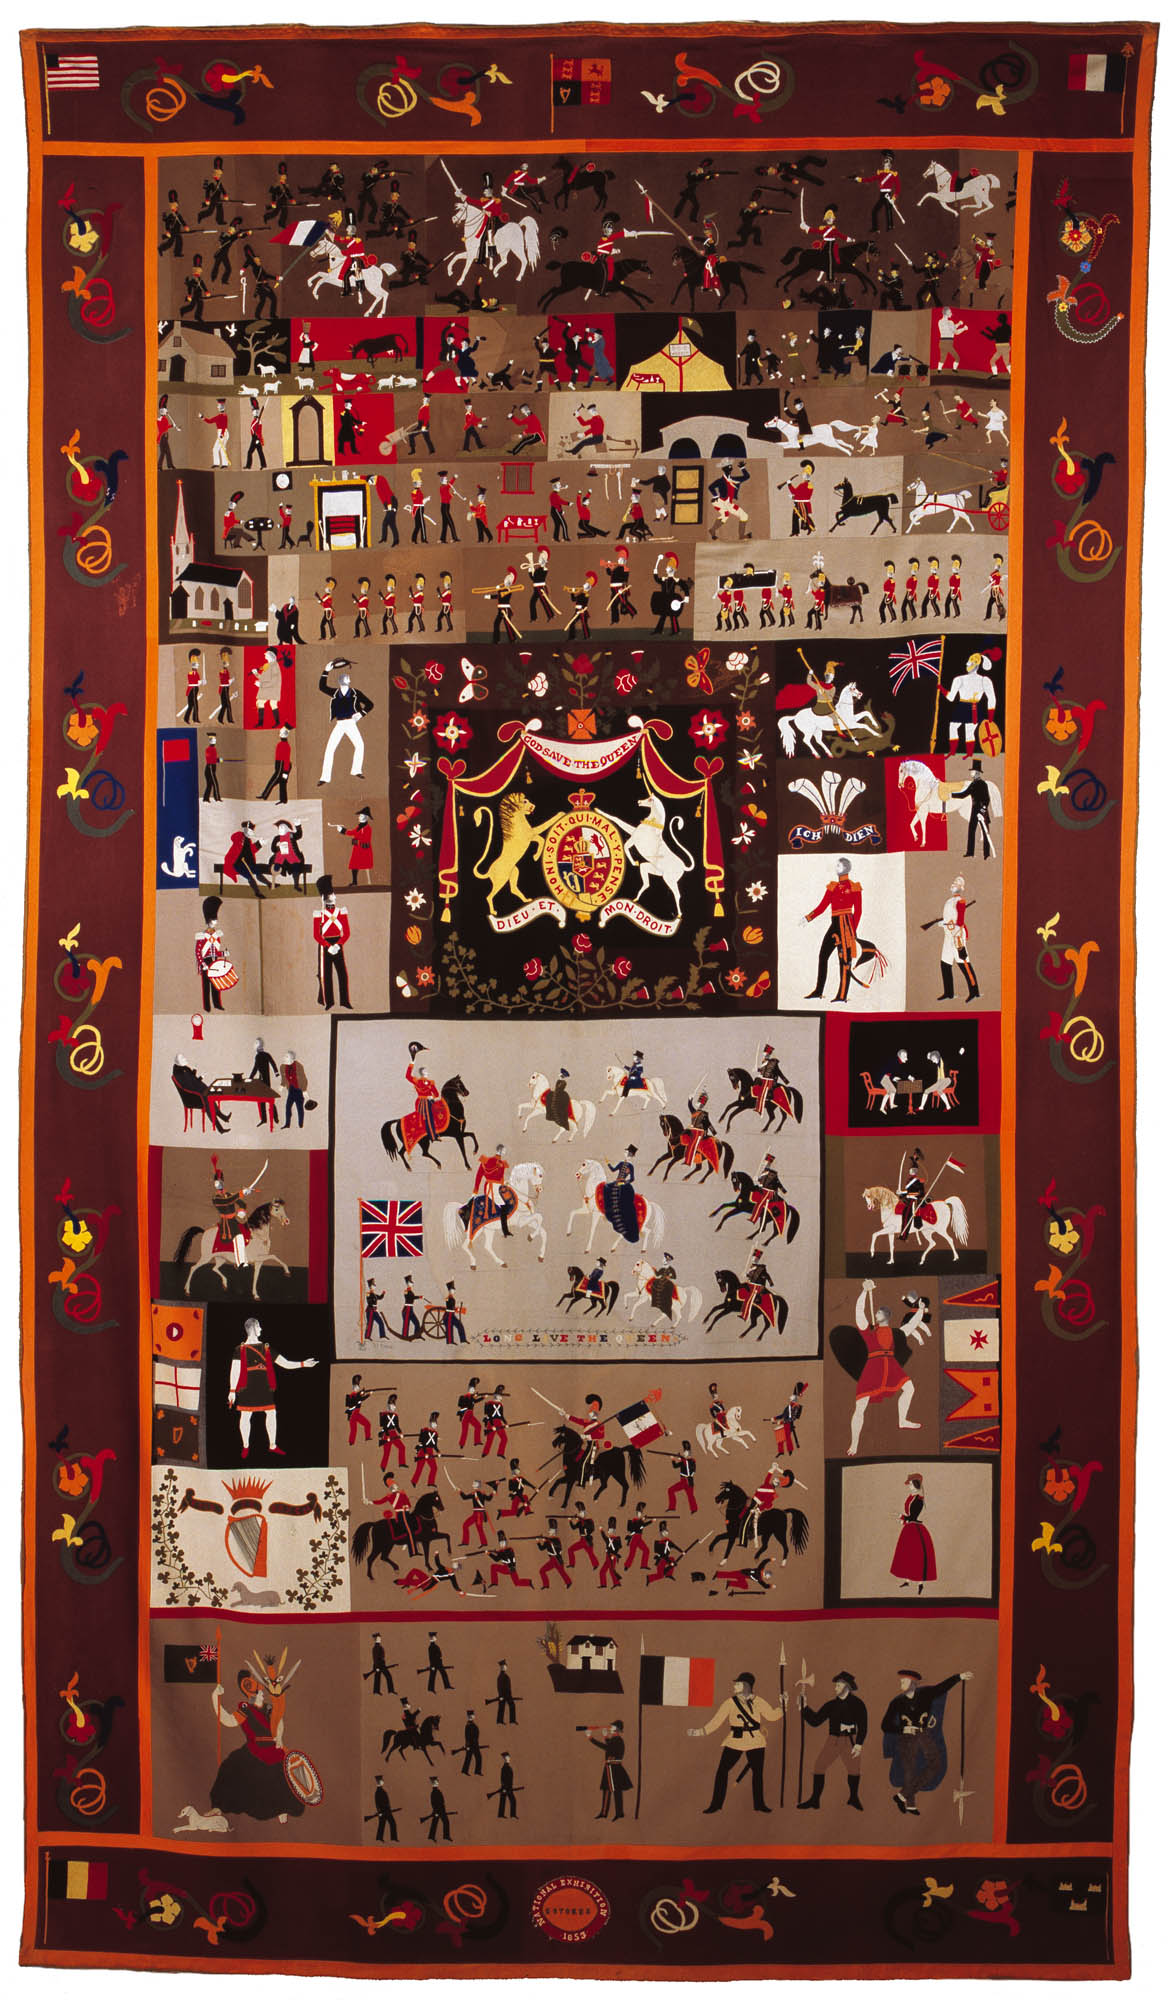 Stokes Tapestry is a textile with 31 panels containing 250 figures of soldiers with horses, buildings and symbols.